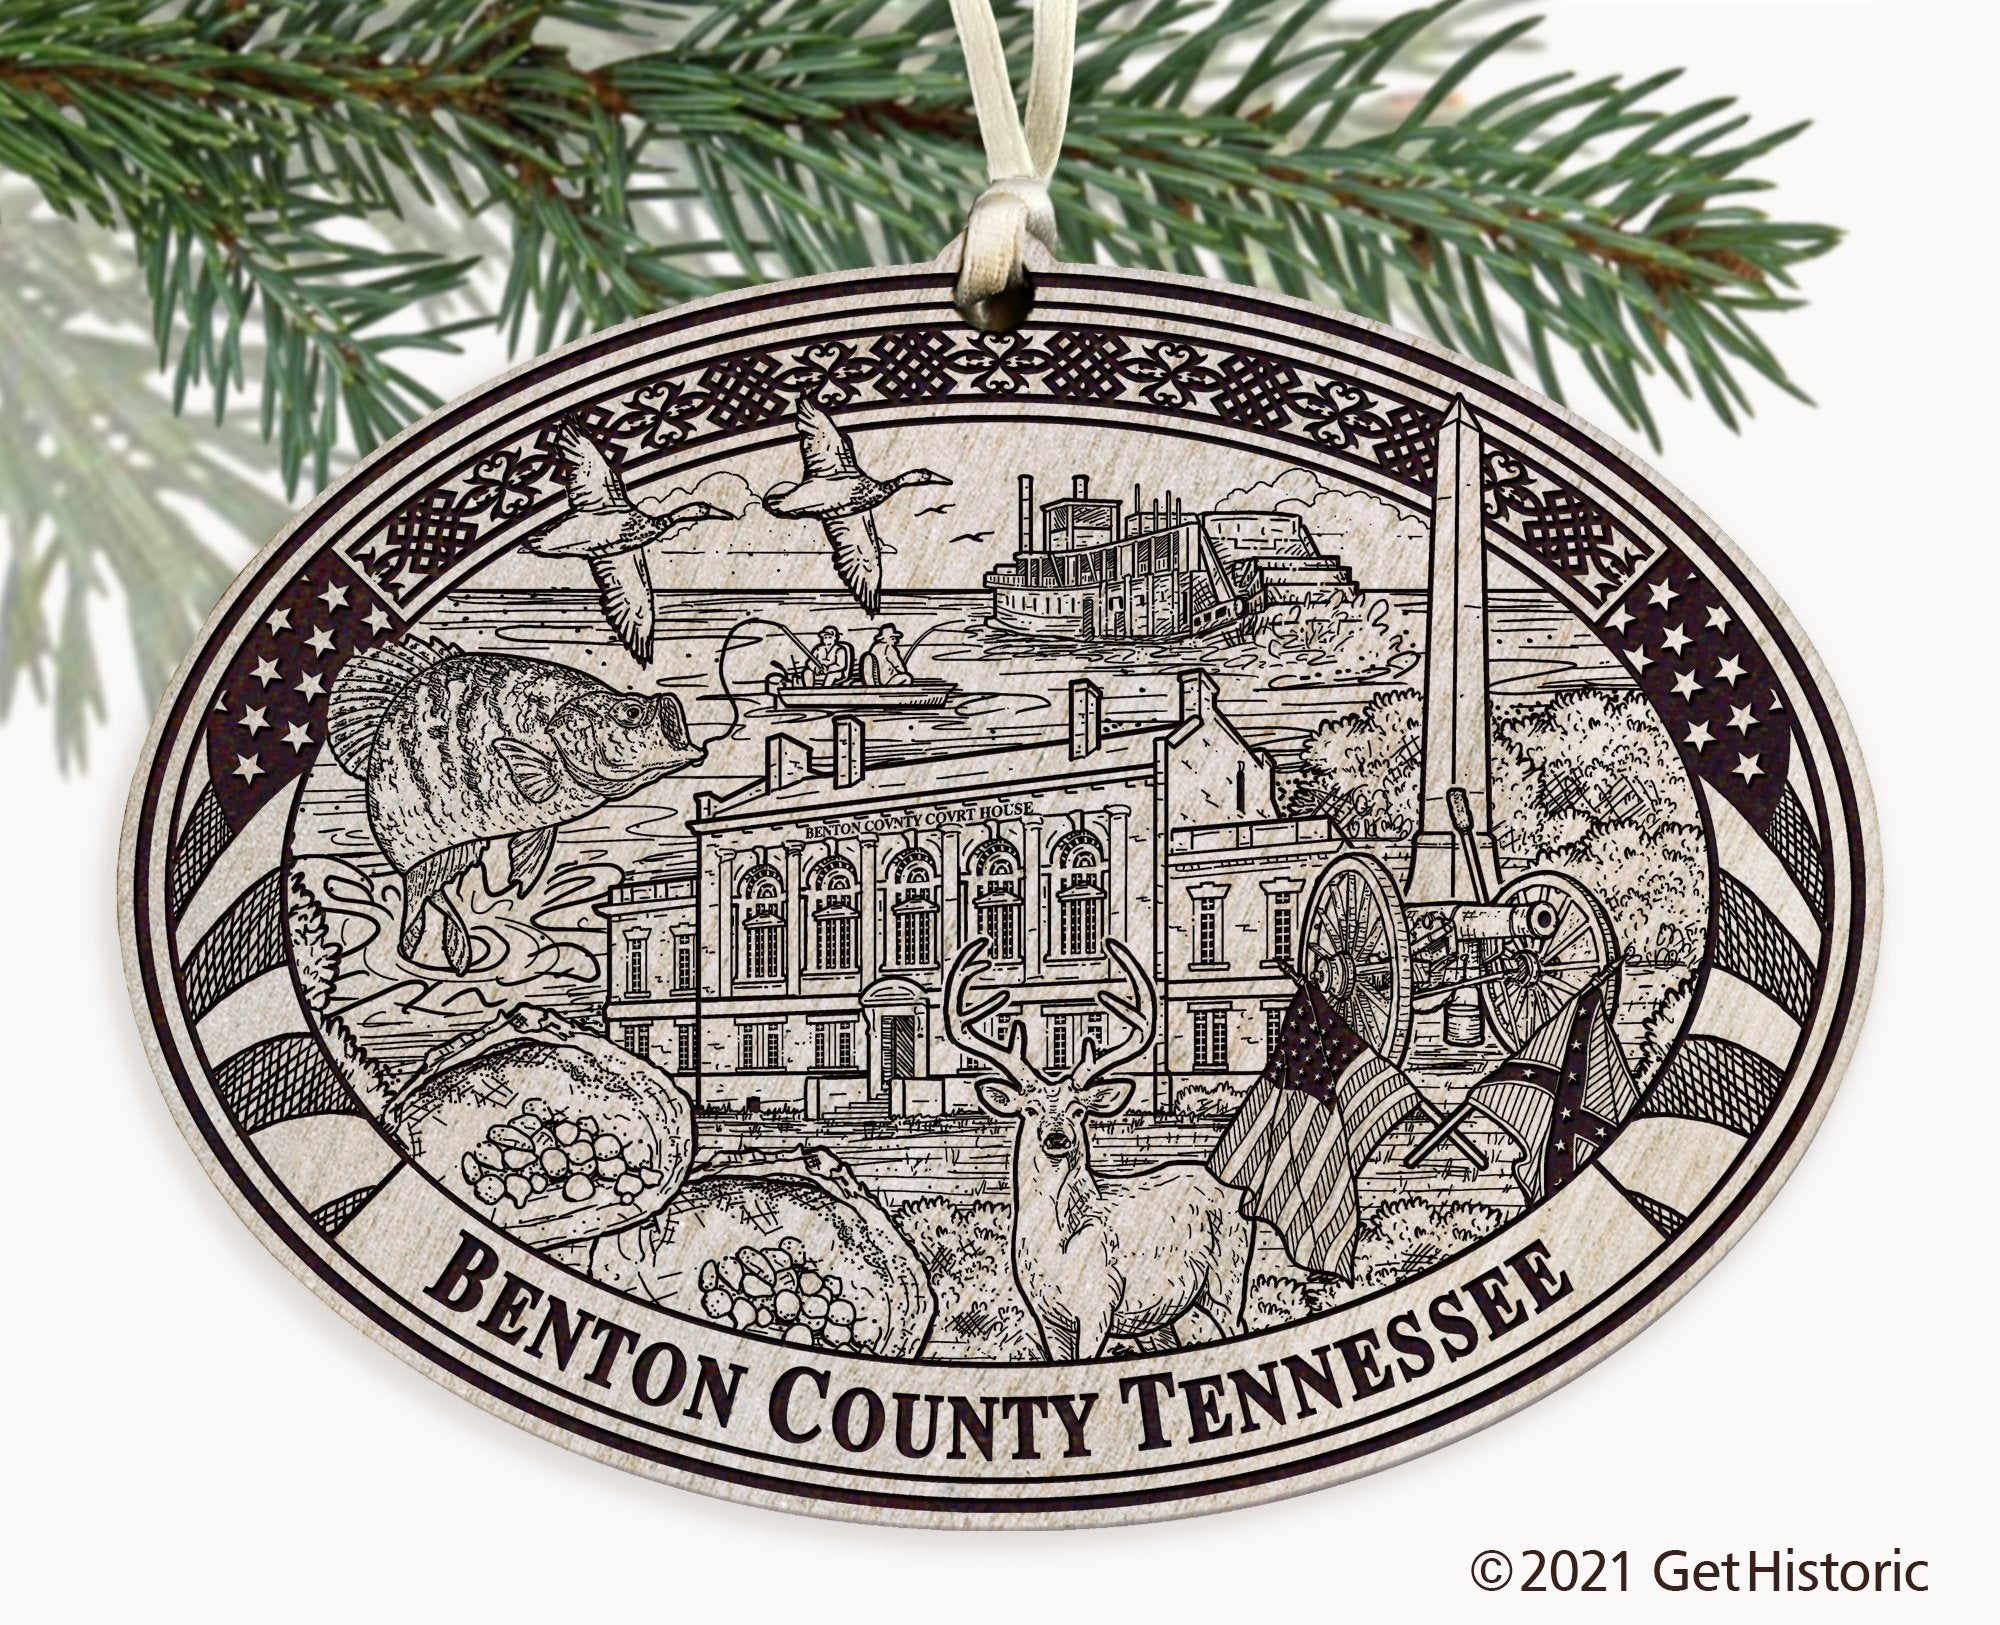 Benton County Tennessee Engraved Ornament